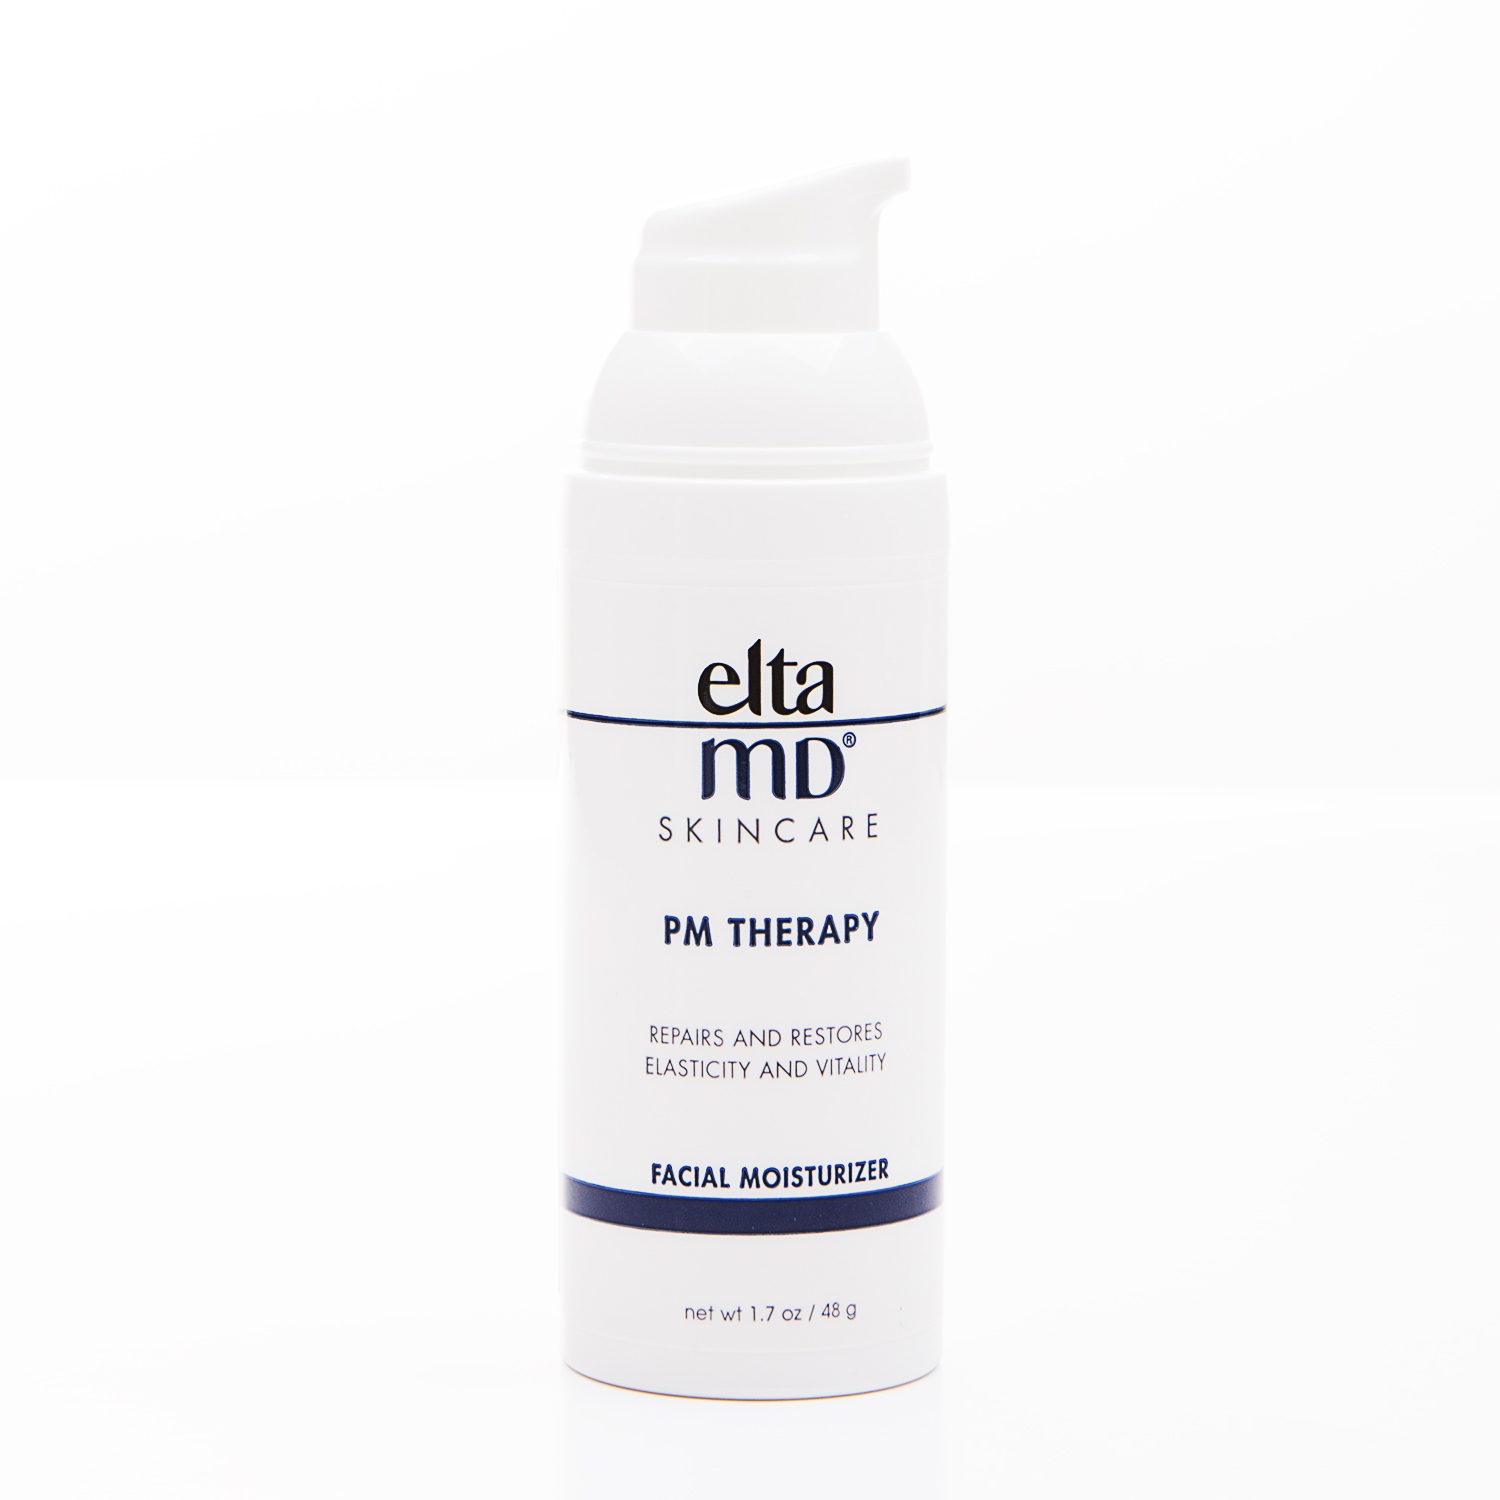 EltaMD - PM Therapy Facial Moisturizer - Click to Shop